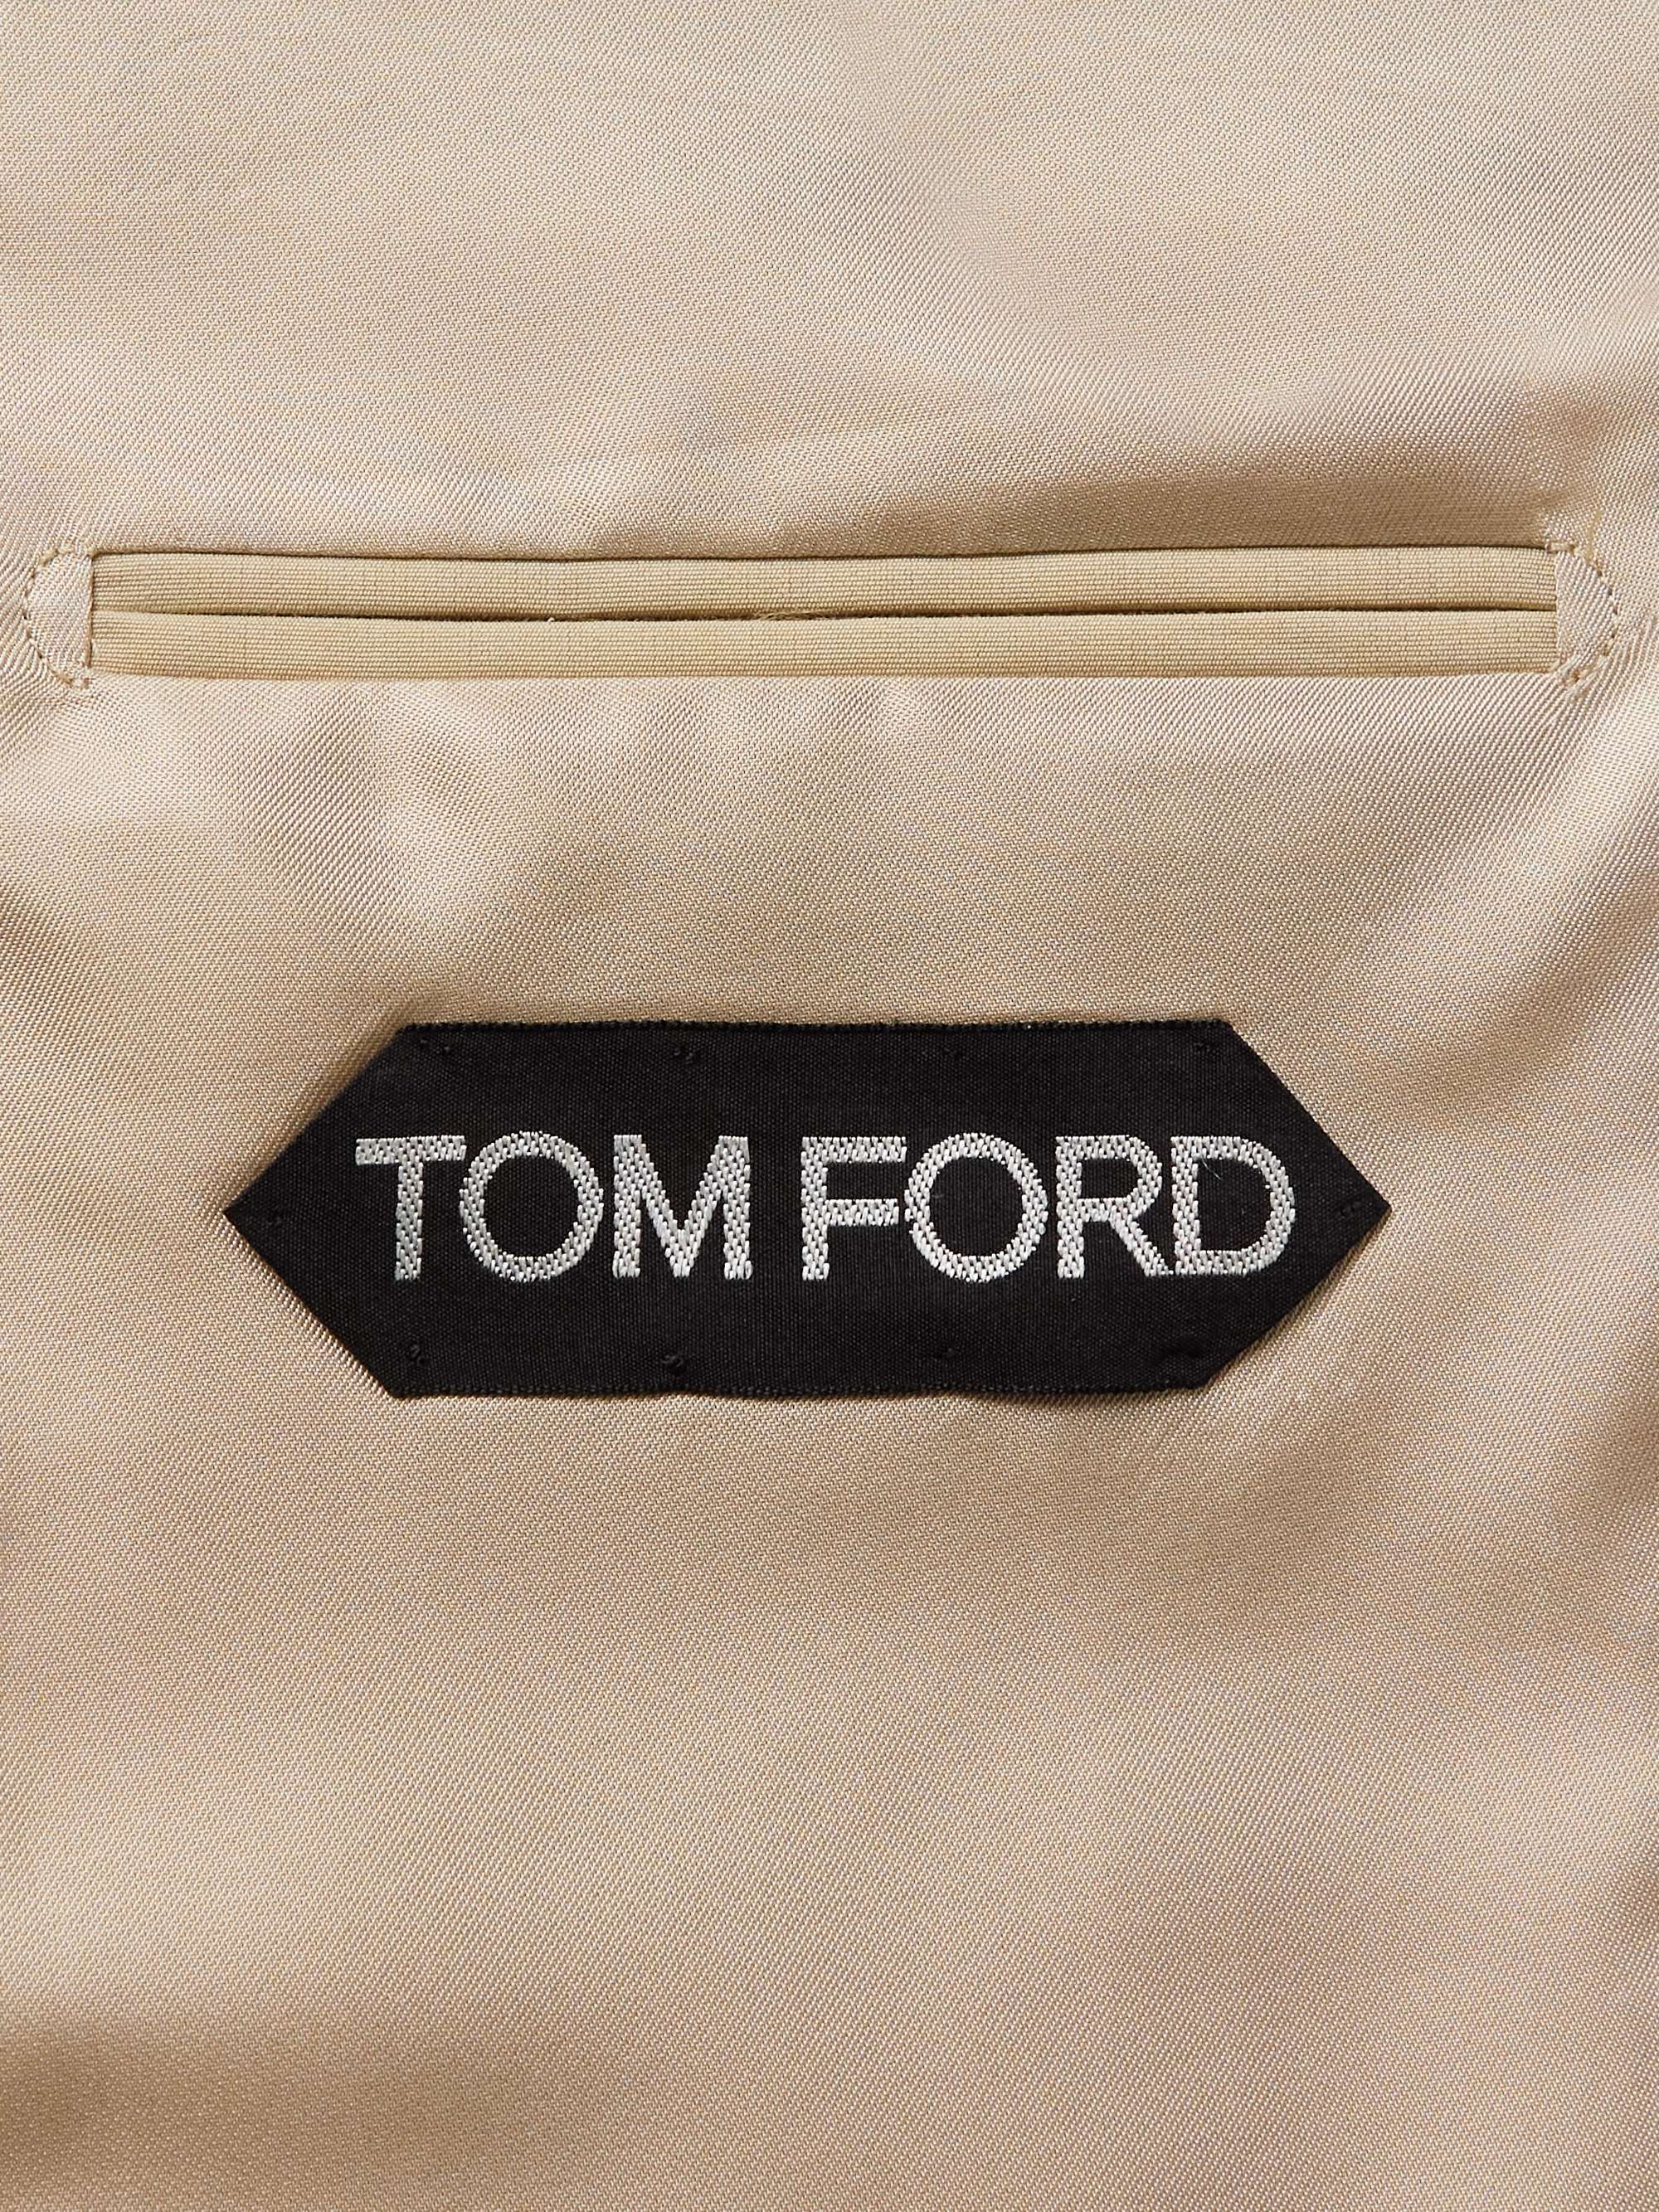 TOM FORD O'Connor Slim-Fit Cotton and Silk-Blend Suit Jacket